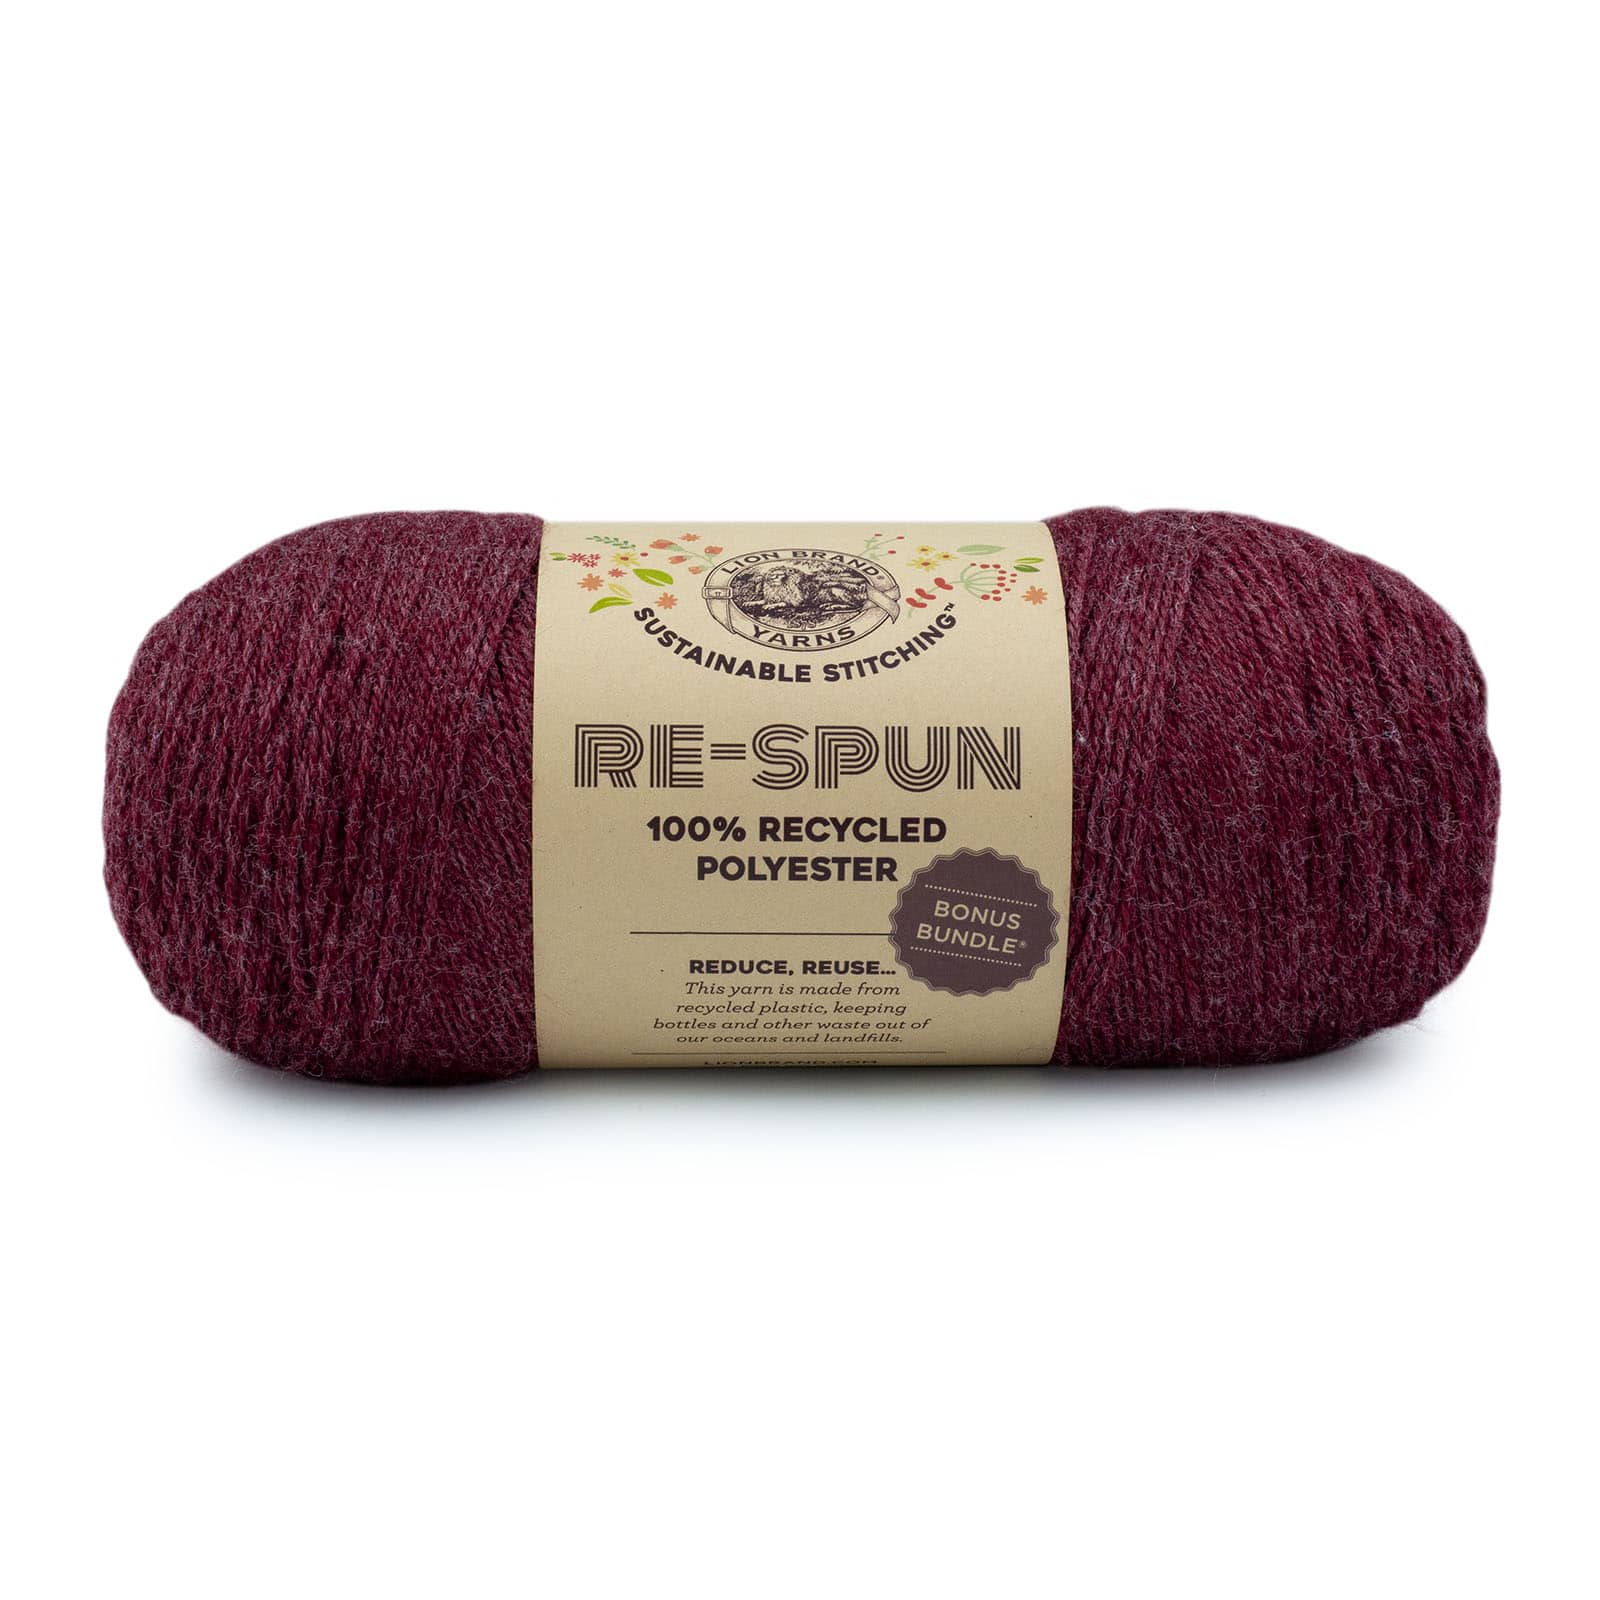 Lion Brand Yarn - Have you seen the Deal of the Day? For